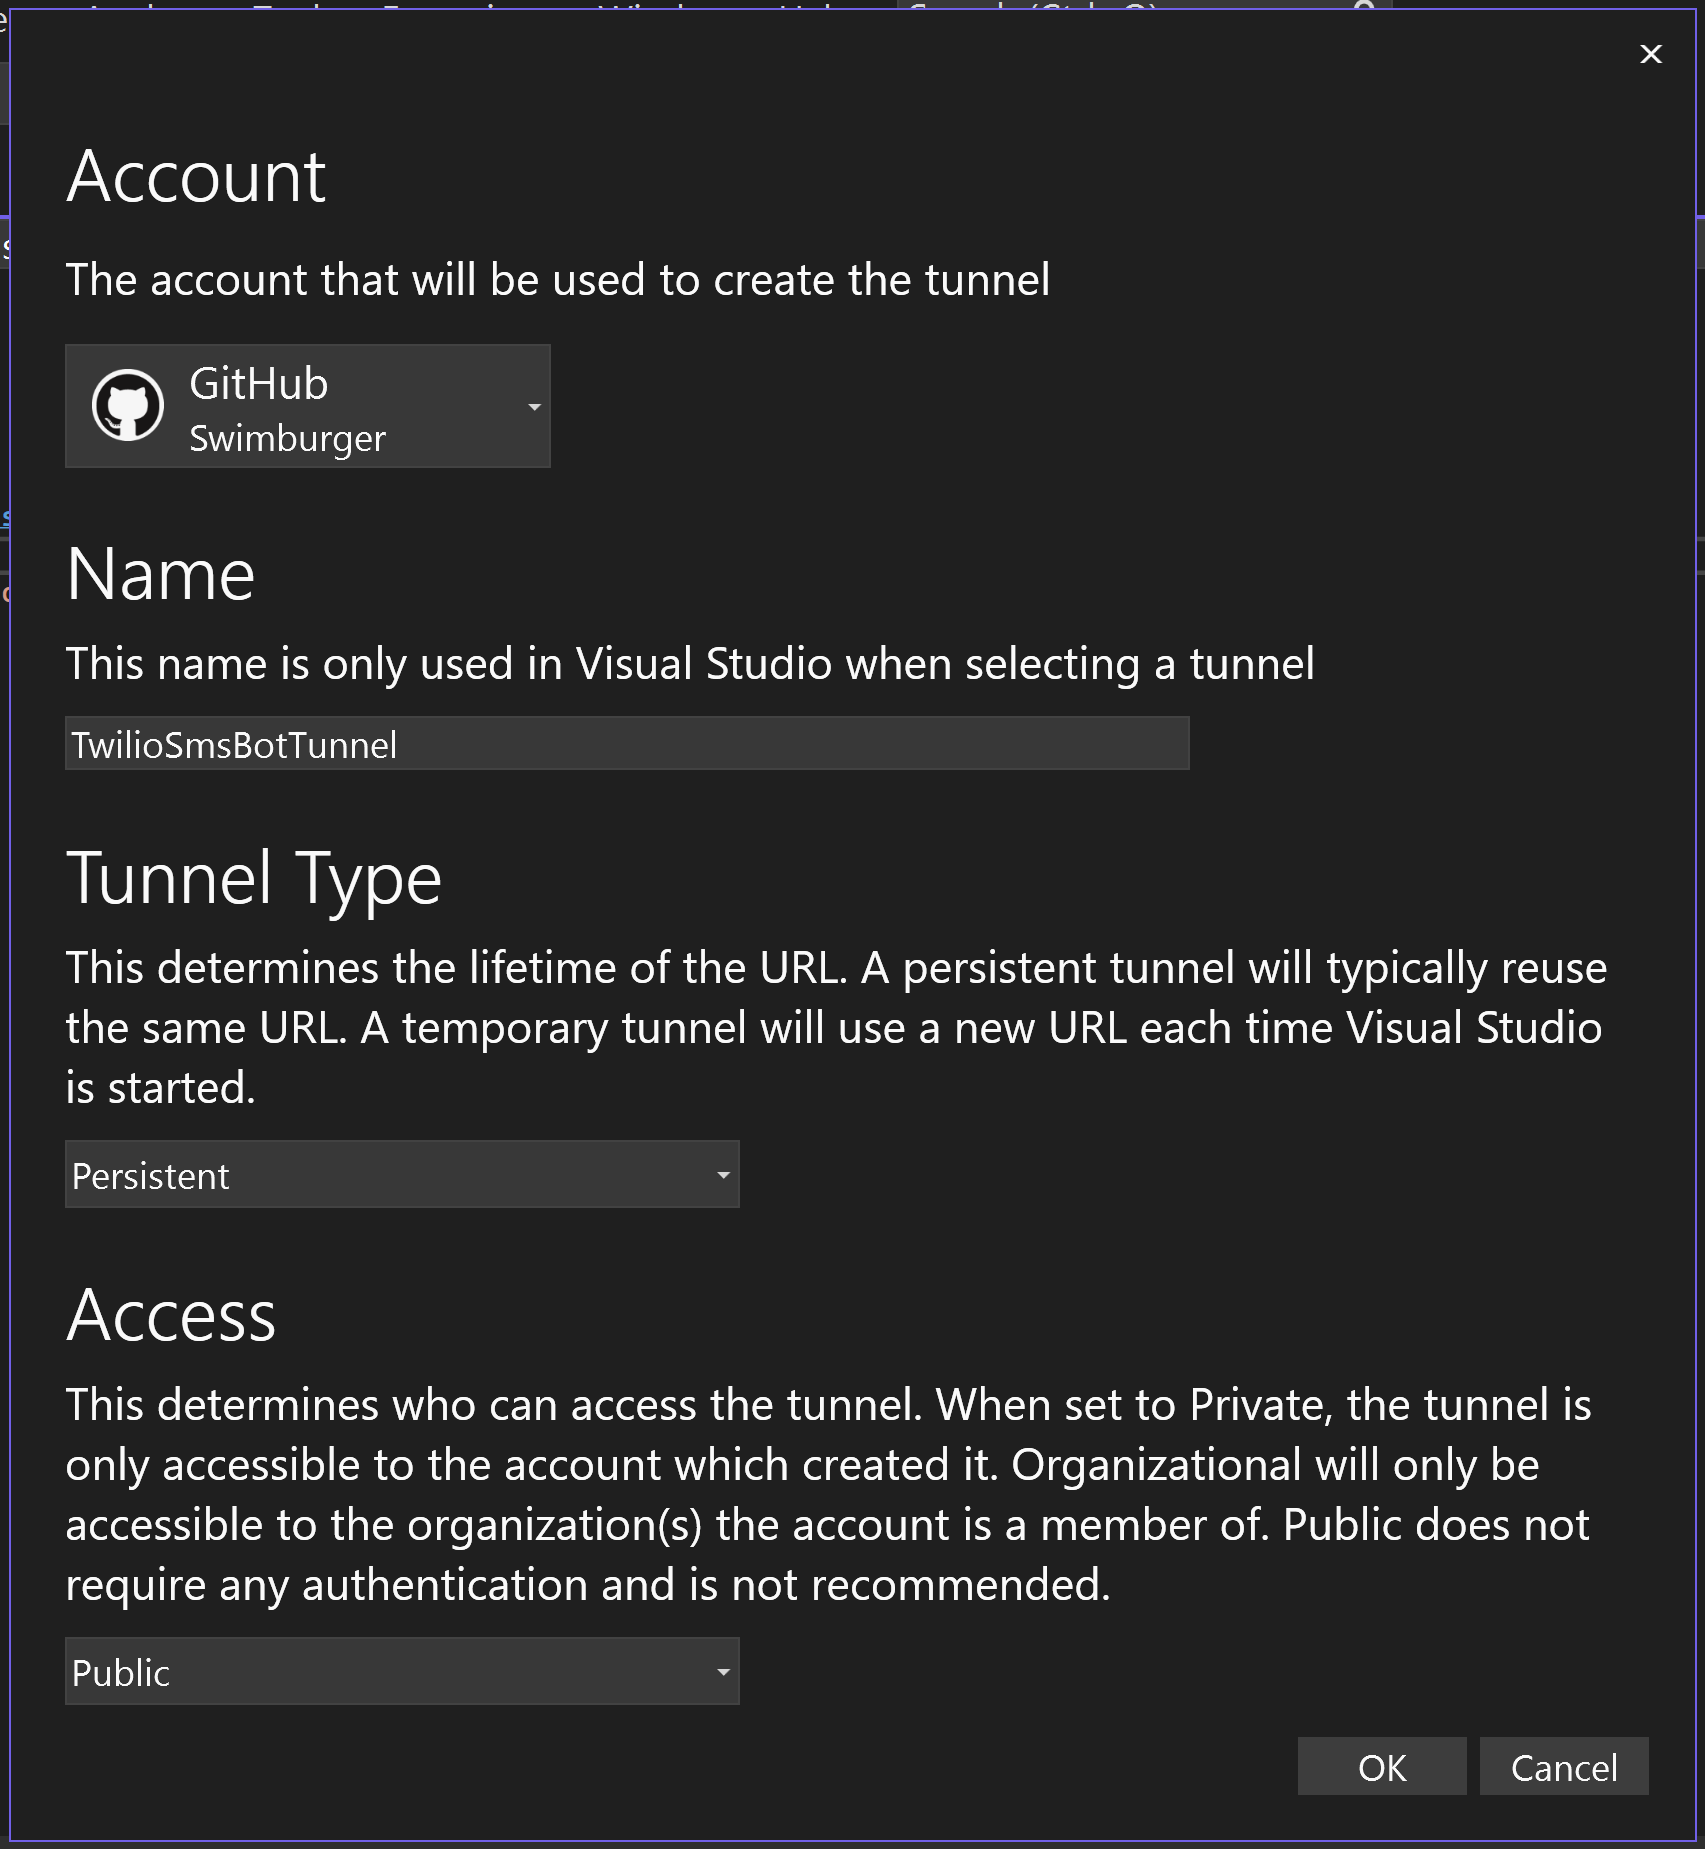 Dialog with form to create dev tunnel. The form asks for the account to create the tunnel for, in this case a GitHub account, a name for the tunnel, the type which is set to Persistent, and the access level which is set to Public.